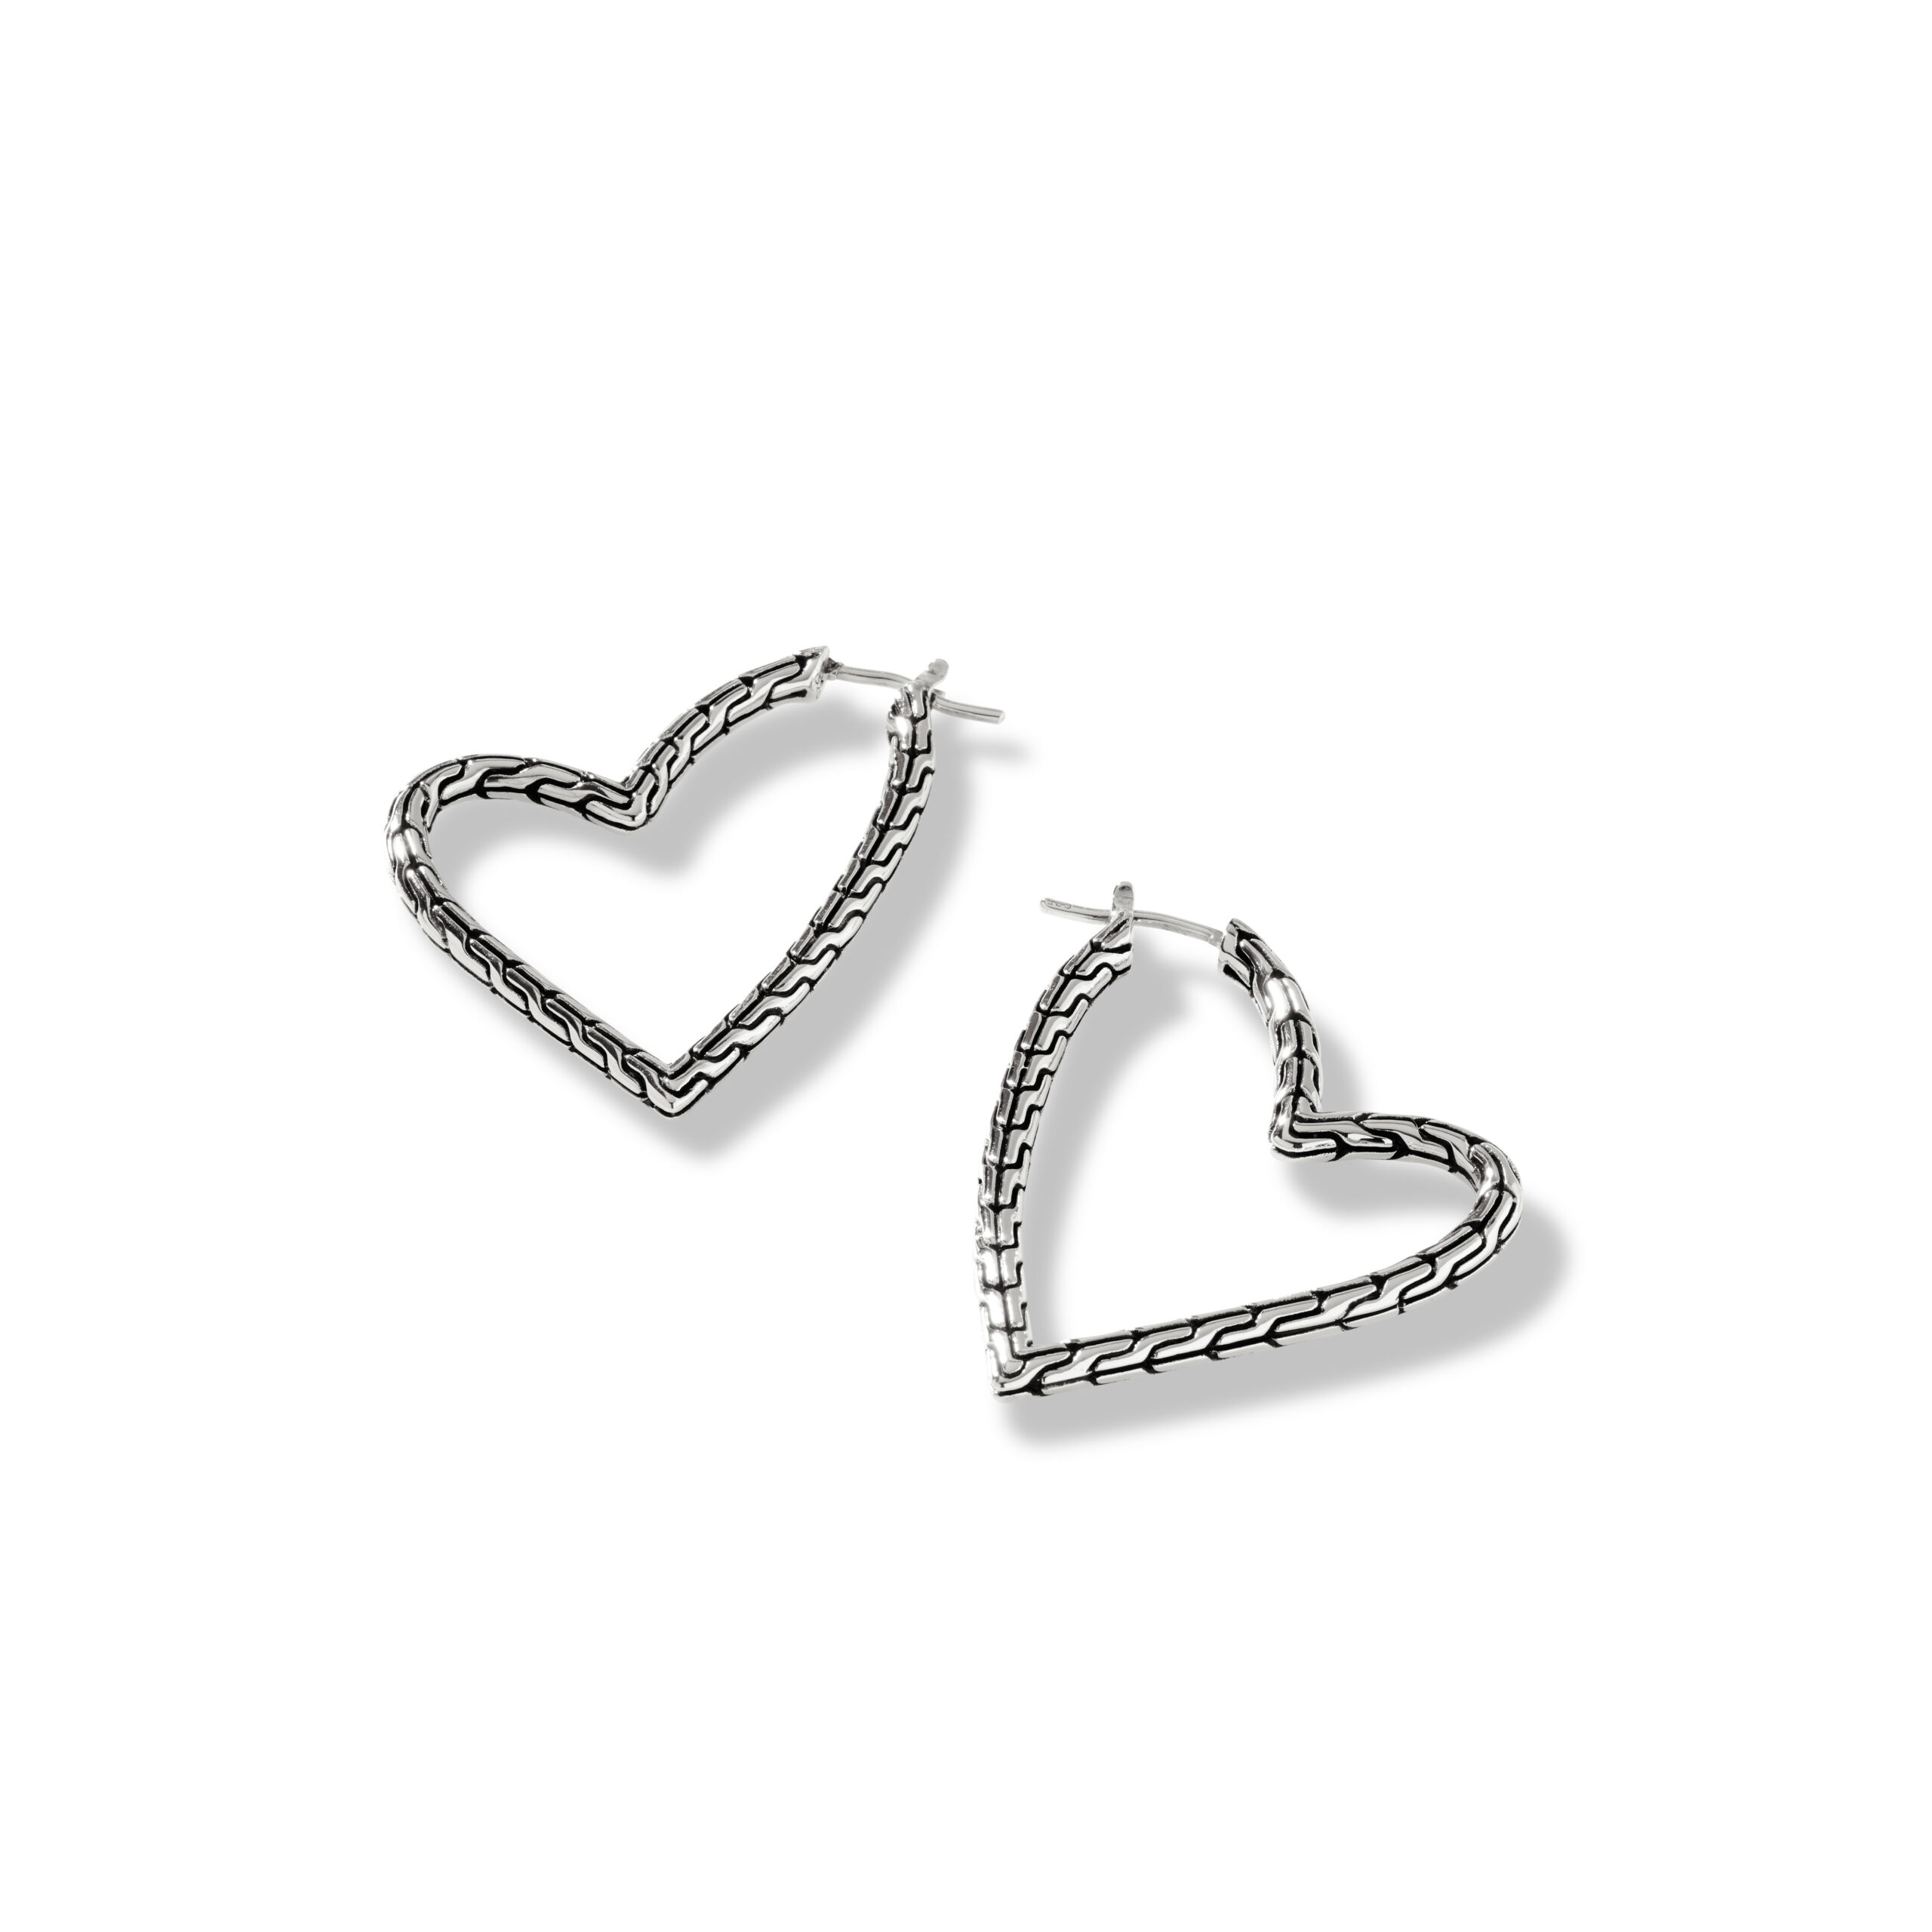 This pair of earrings by John Hardy is crafted from sterling silver and are heart shaped.